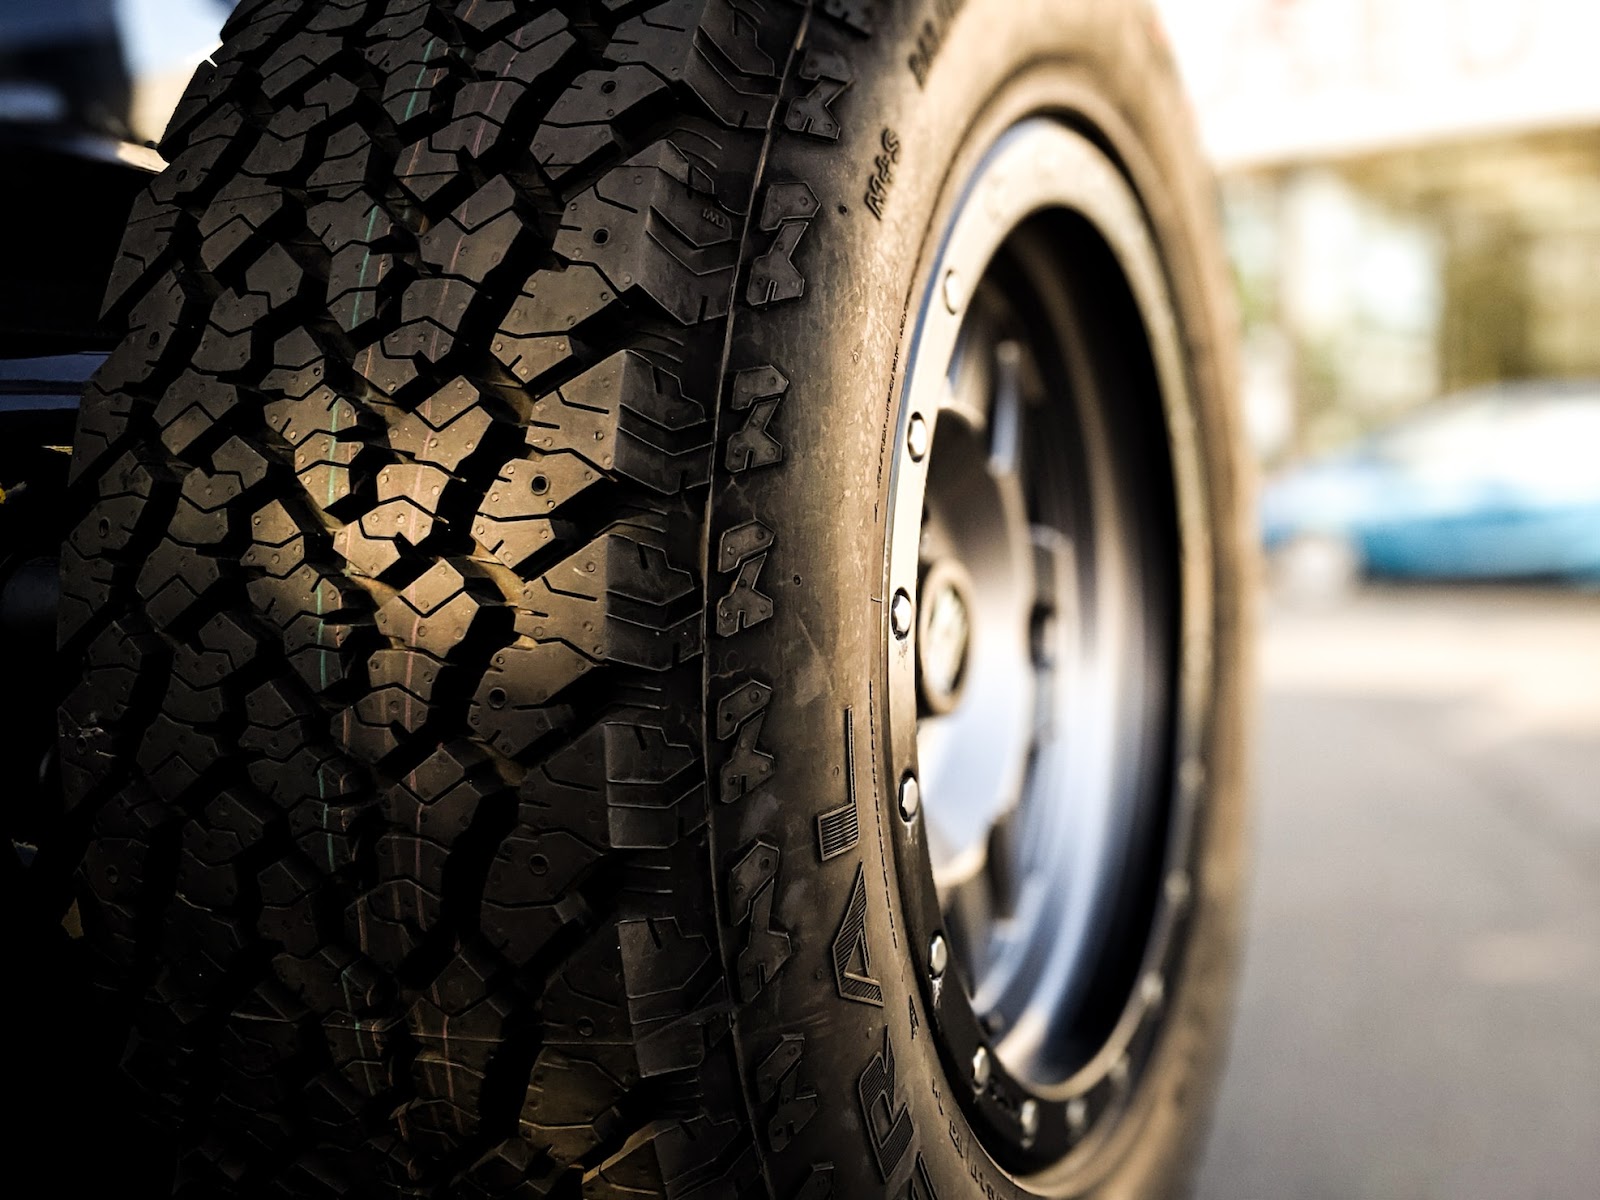 5 Tips for Extending the Life of Your Tires